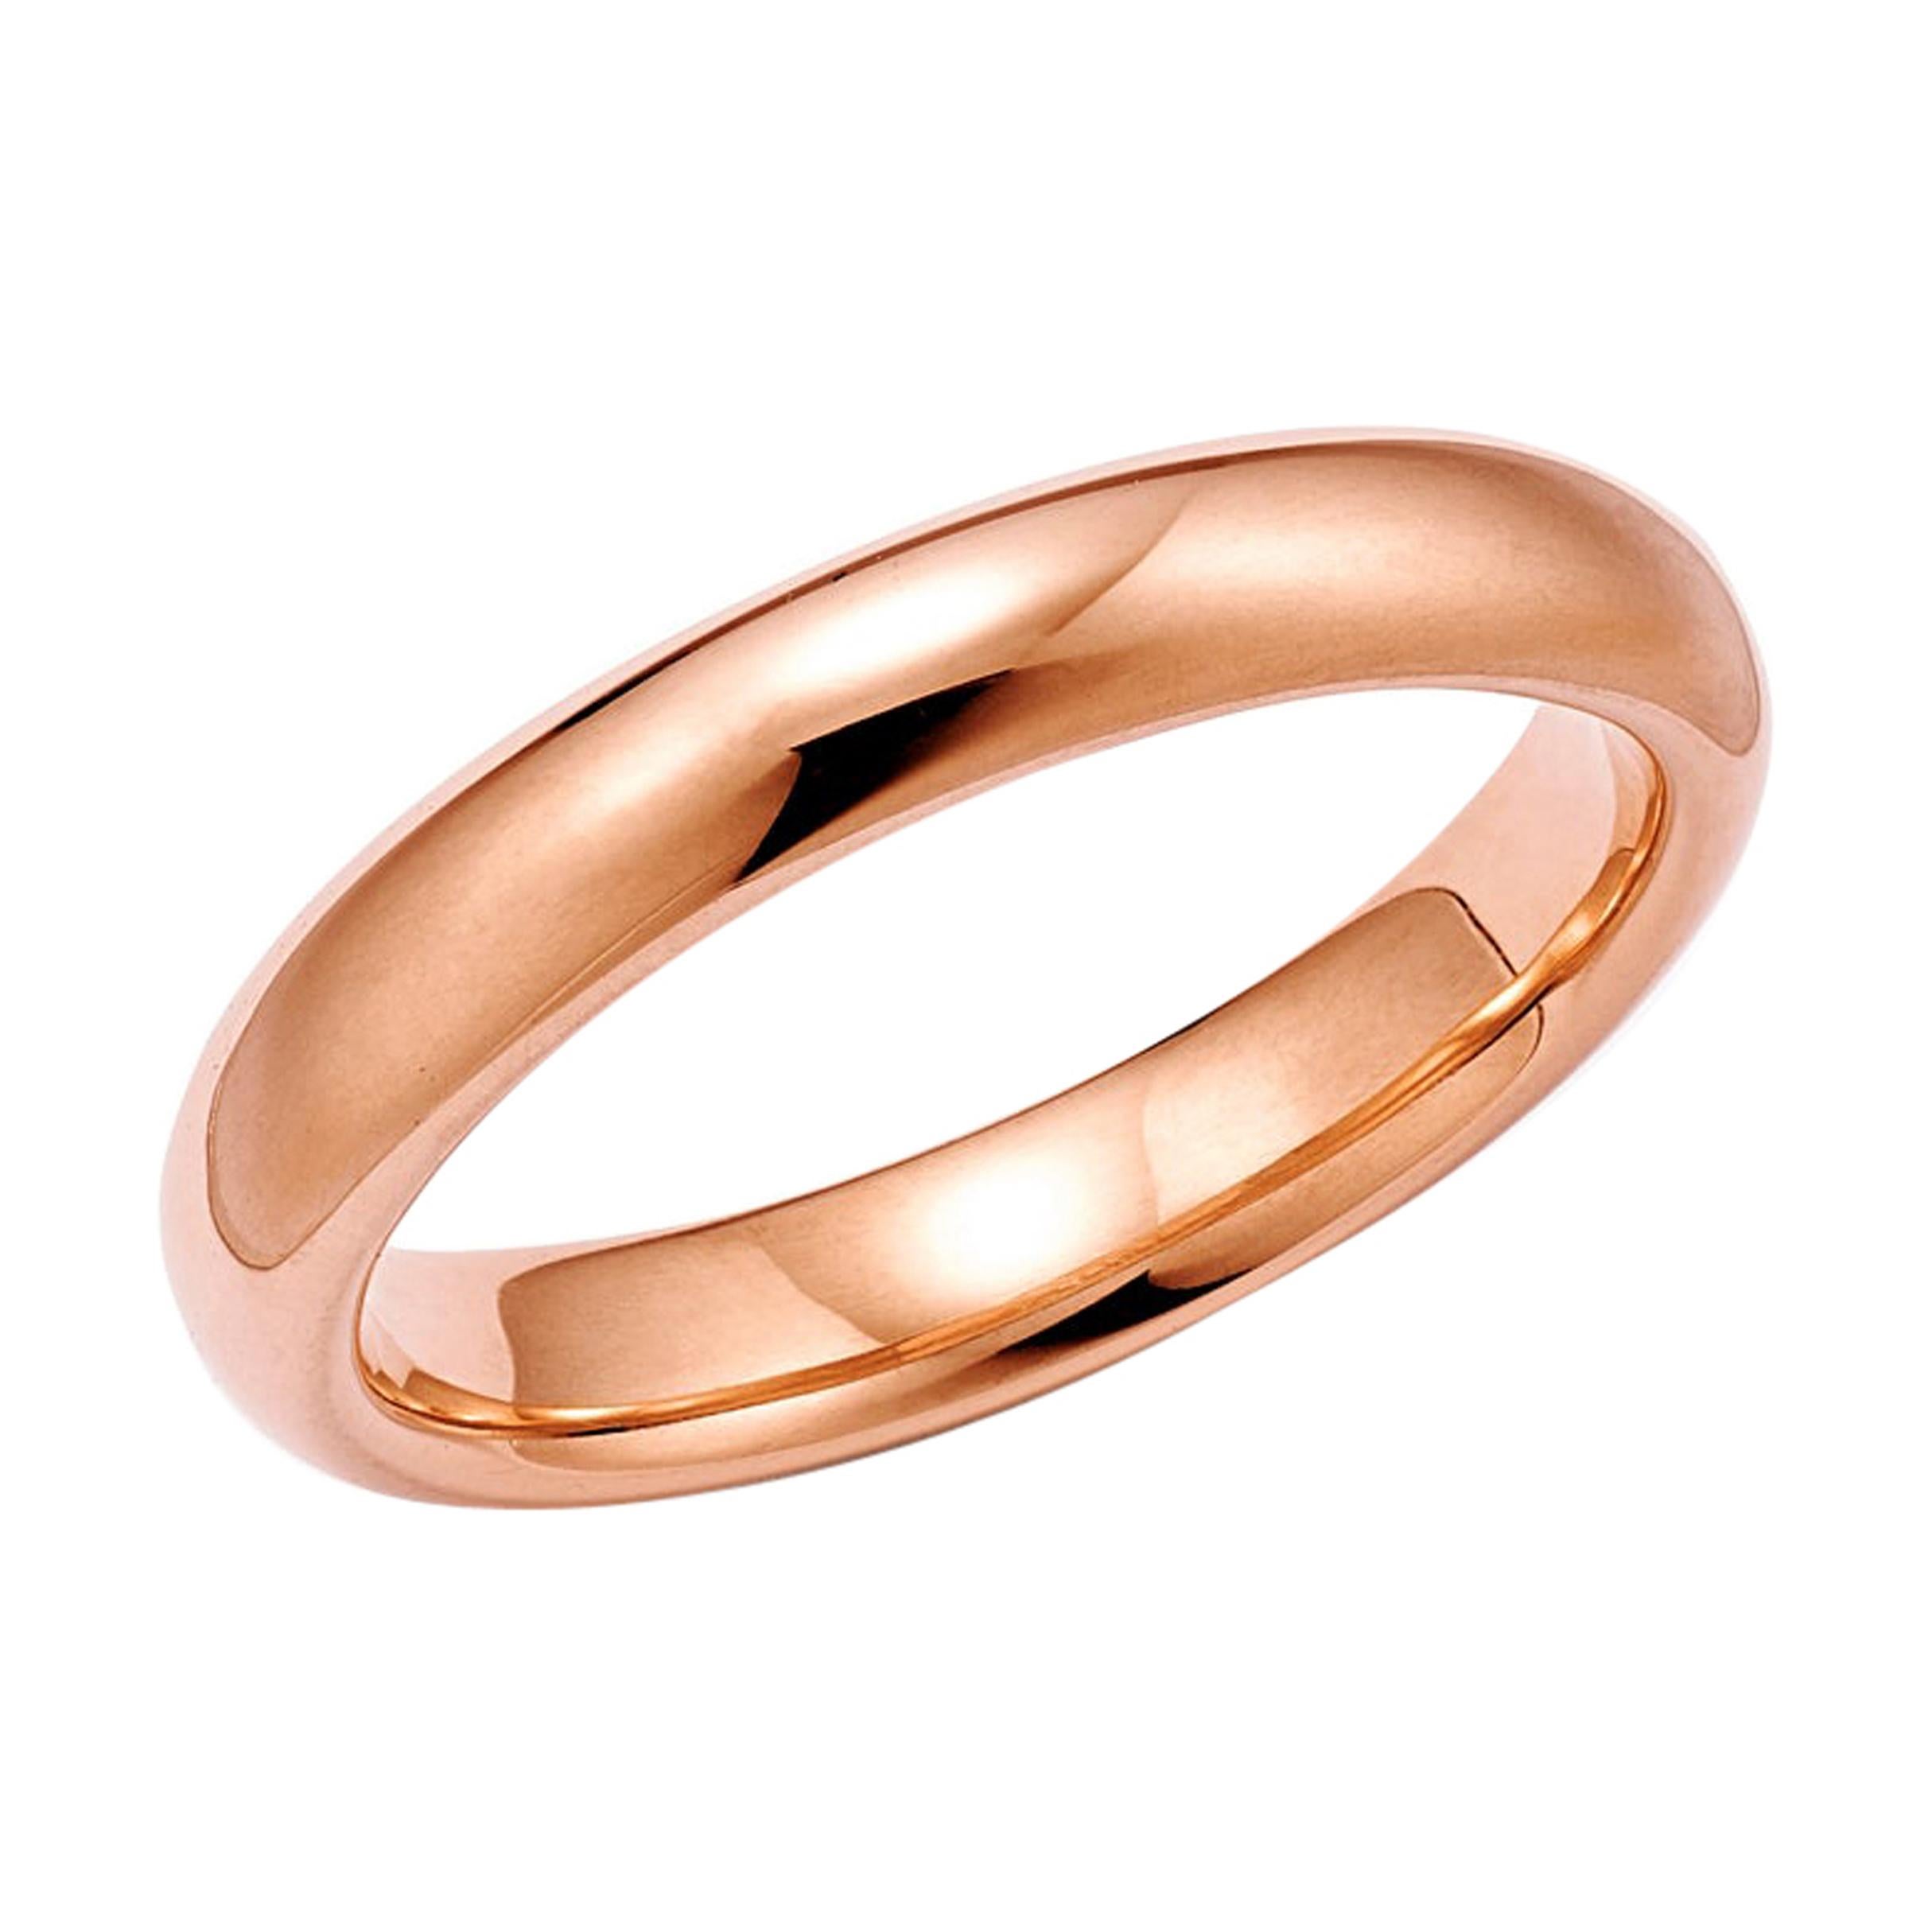 18kt Fairmined Ecological Gold Sincerity Classic Wedding Ring